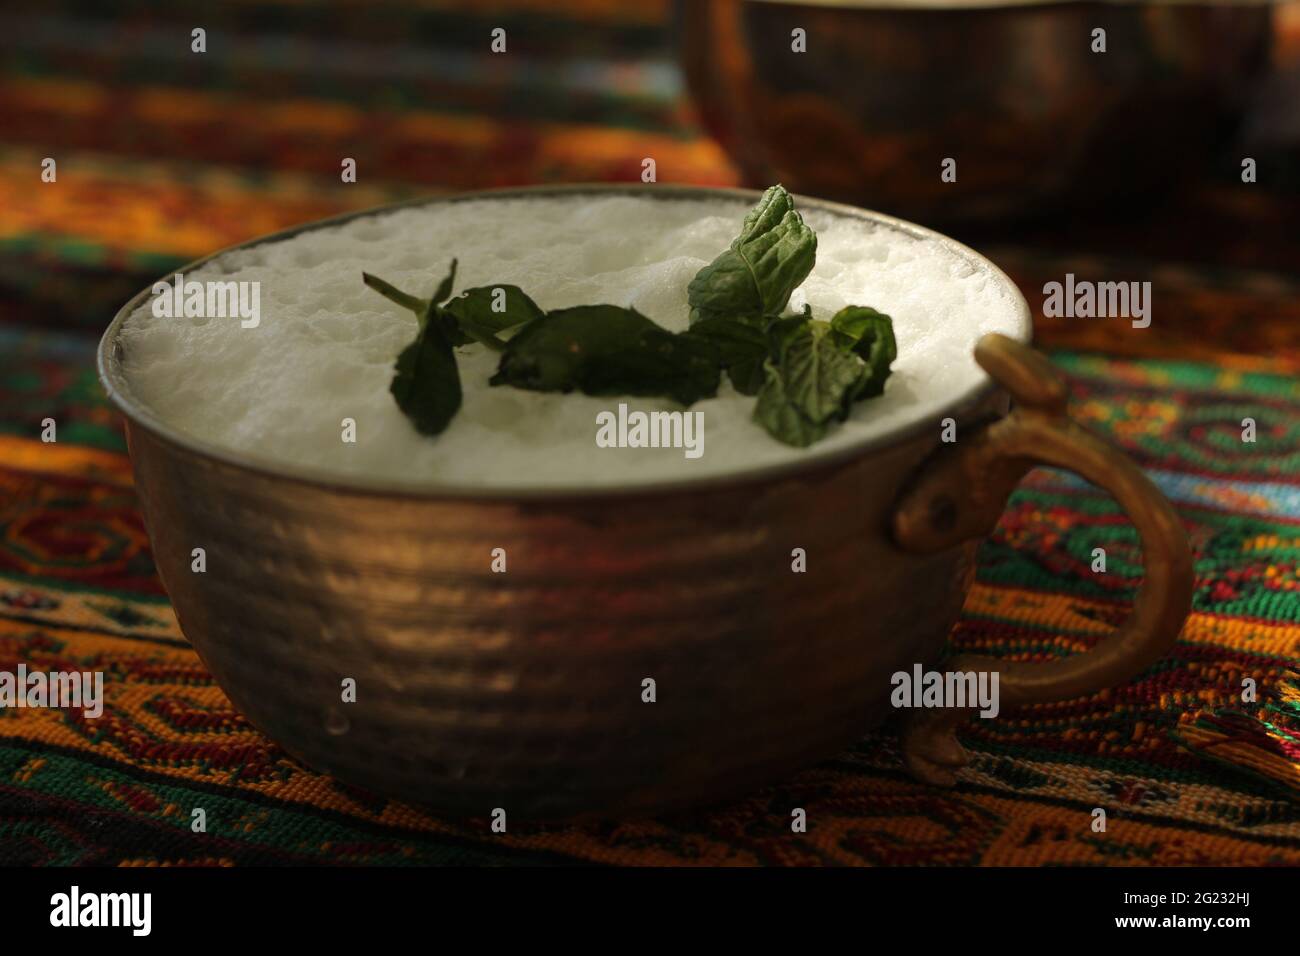 Natural healthy beverage drink ayran served in traditional handmade Anatolian copper cup decorated with fresh mint leaves. Stock Photo